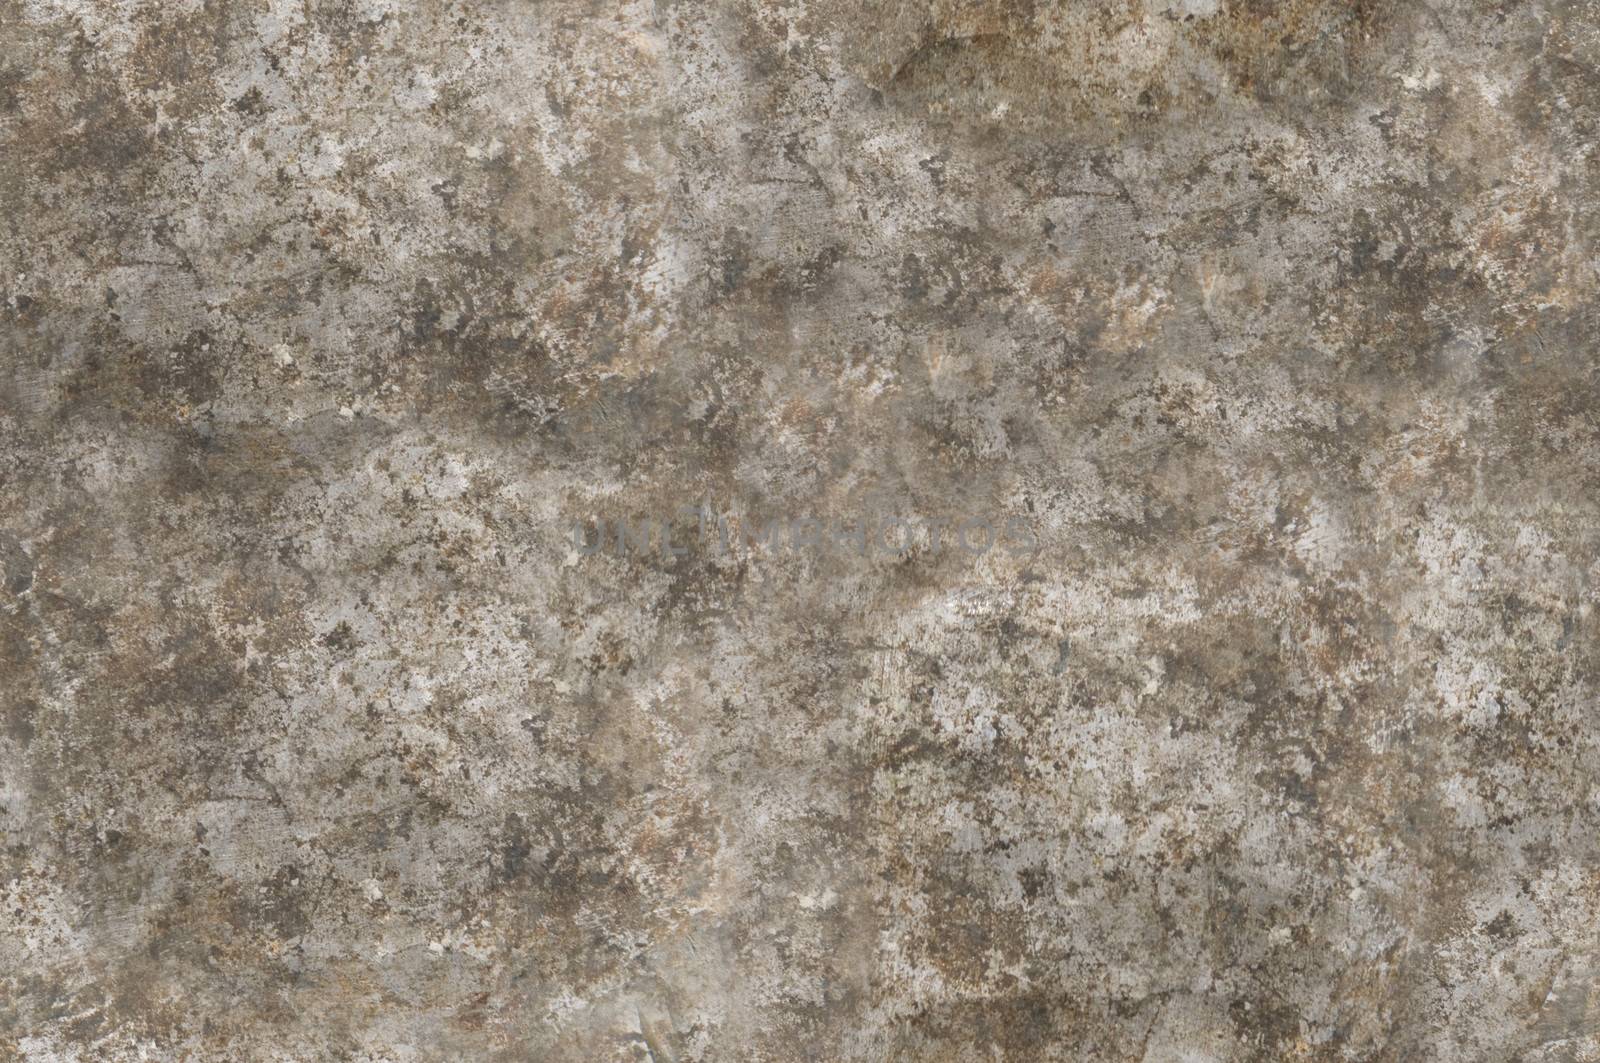 Distressed metal surface texture seamlessly tileable by Balefire9